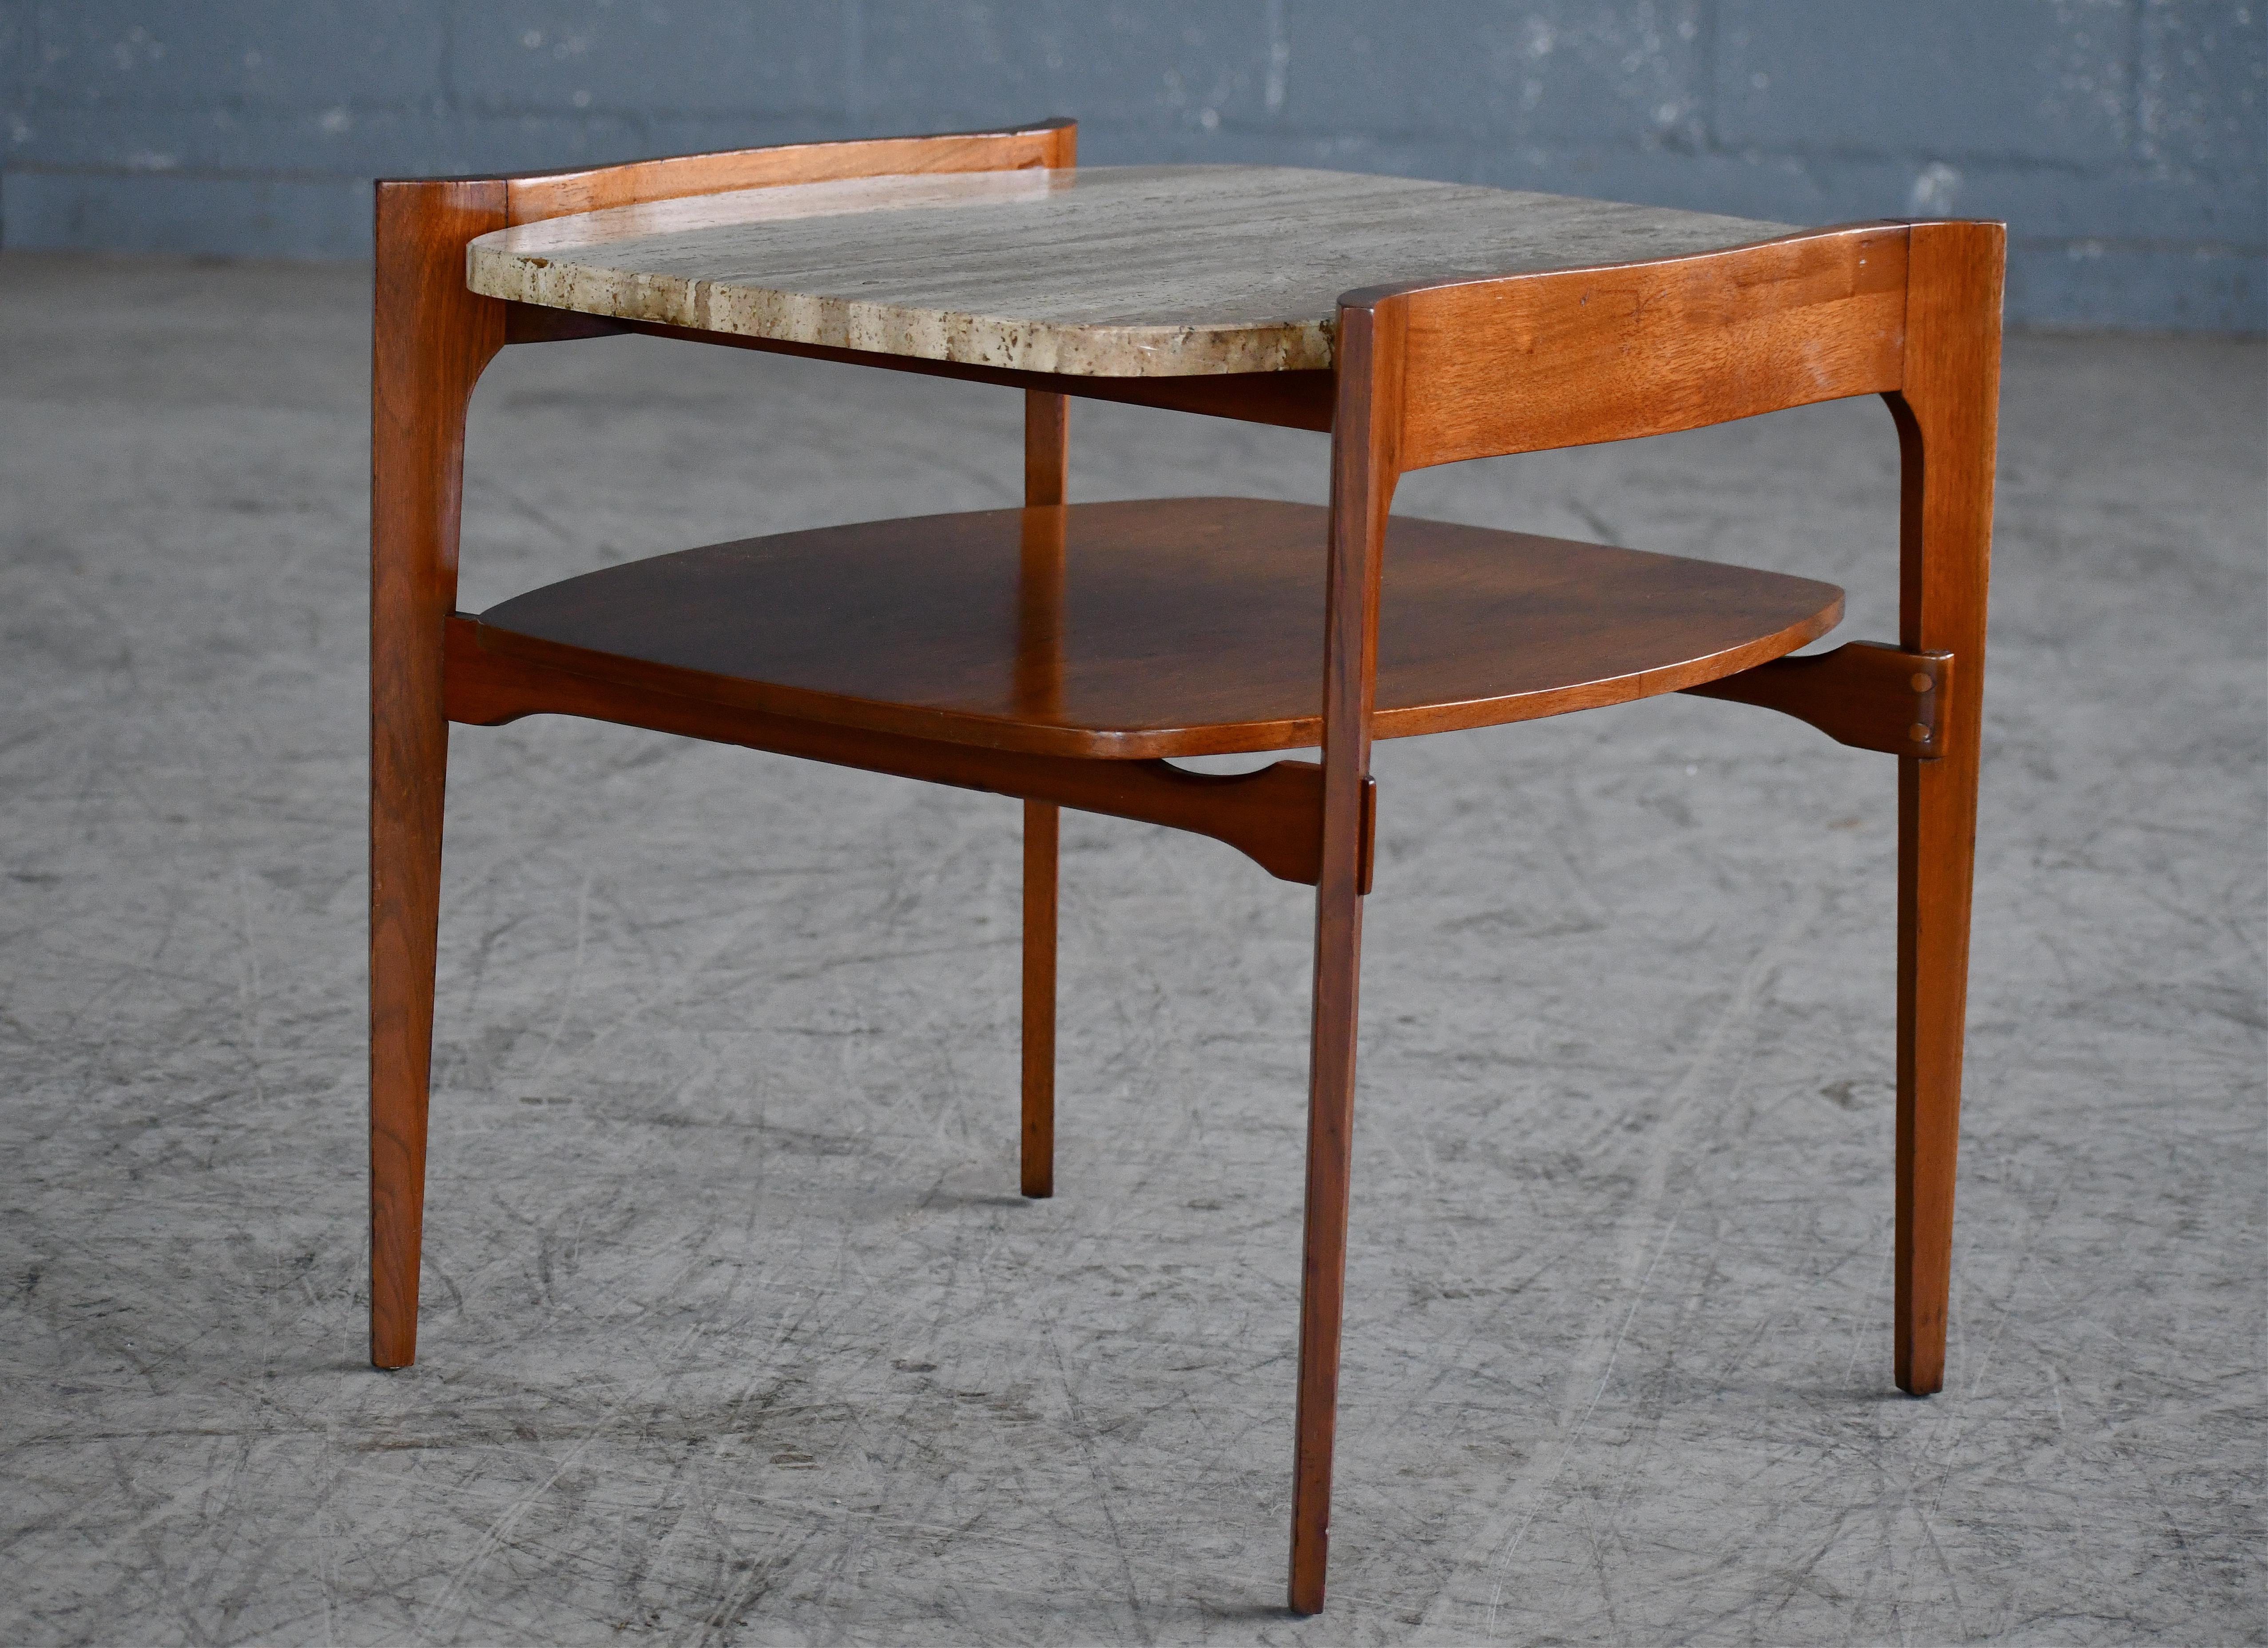 Mid-20th Century Bertha Schaefer Midcentury End or Side Table in Walnut with Travertine Top  For Sale